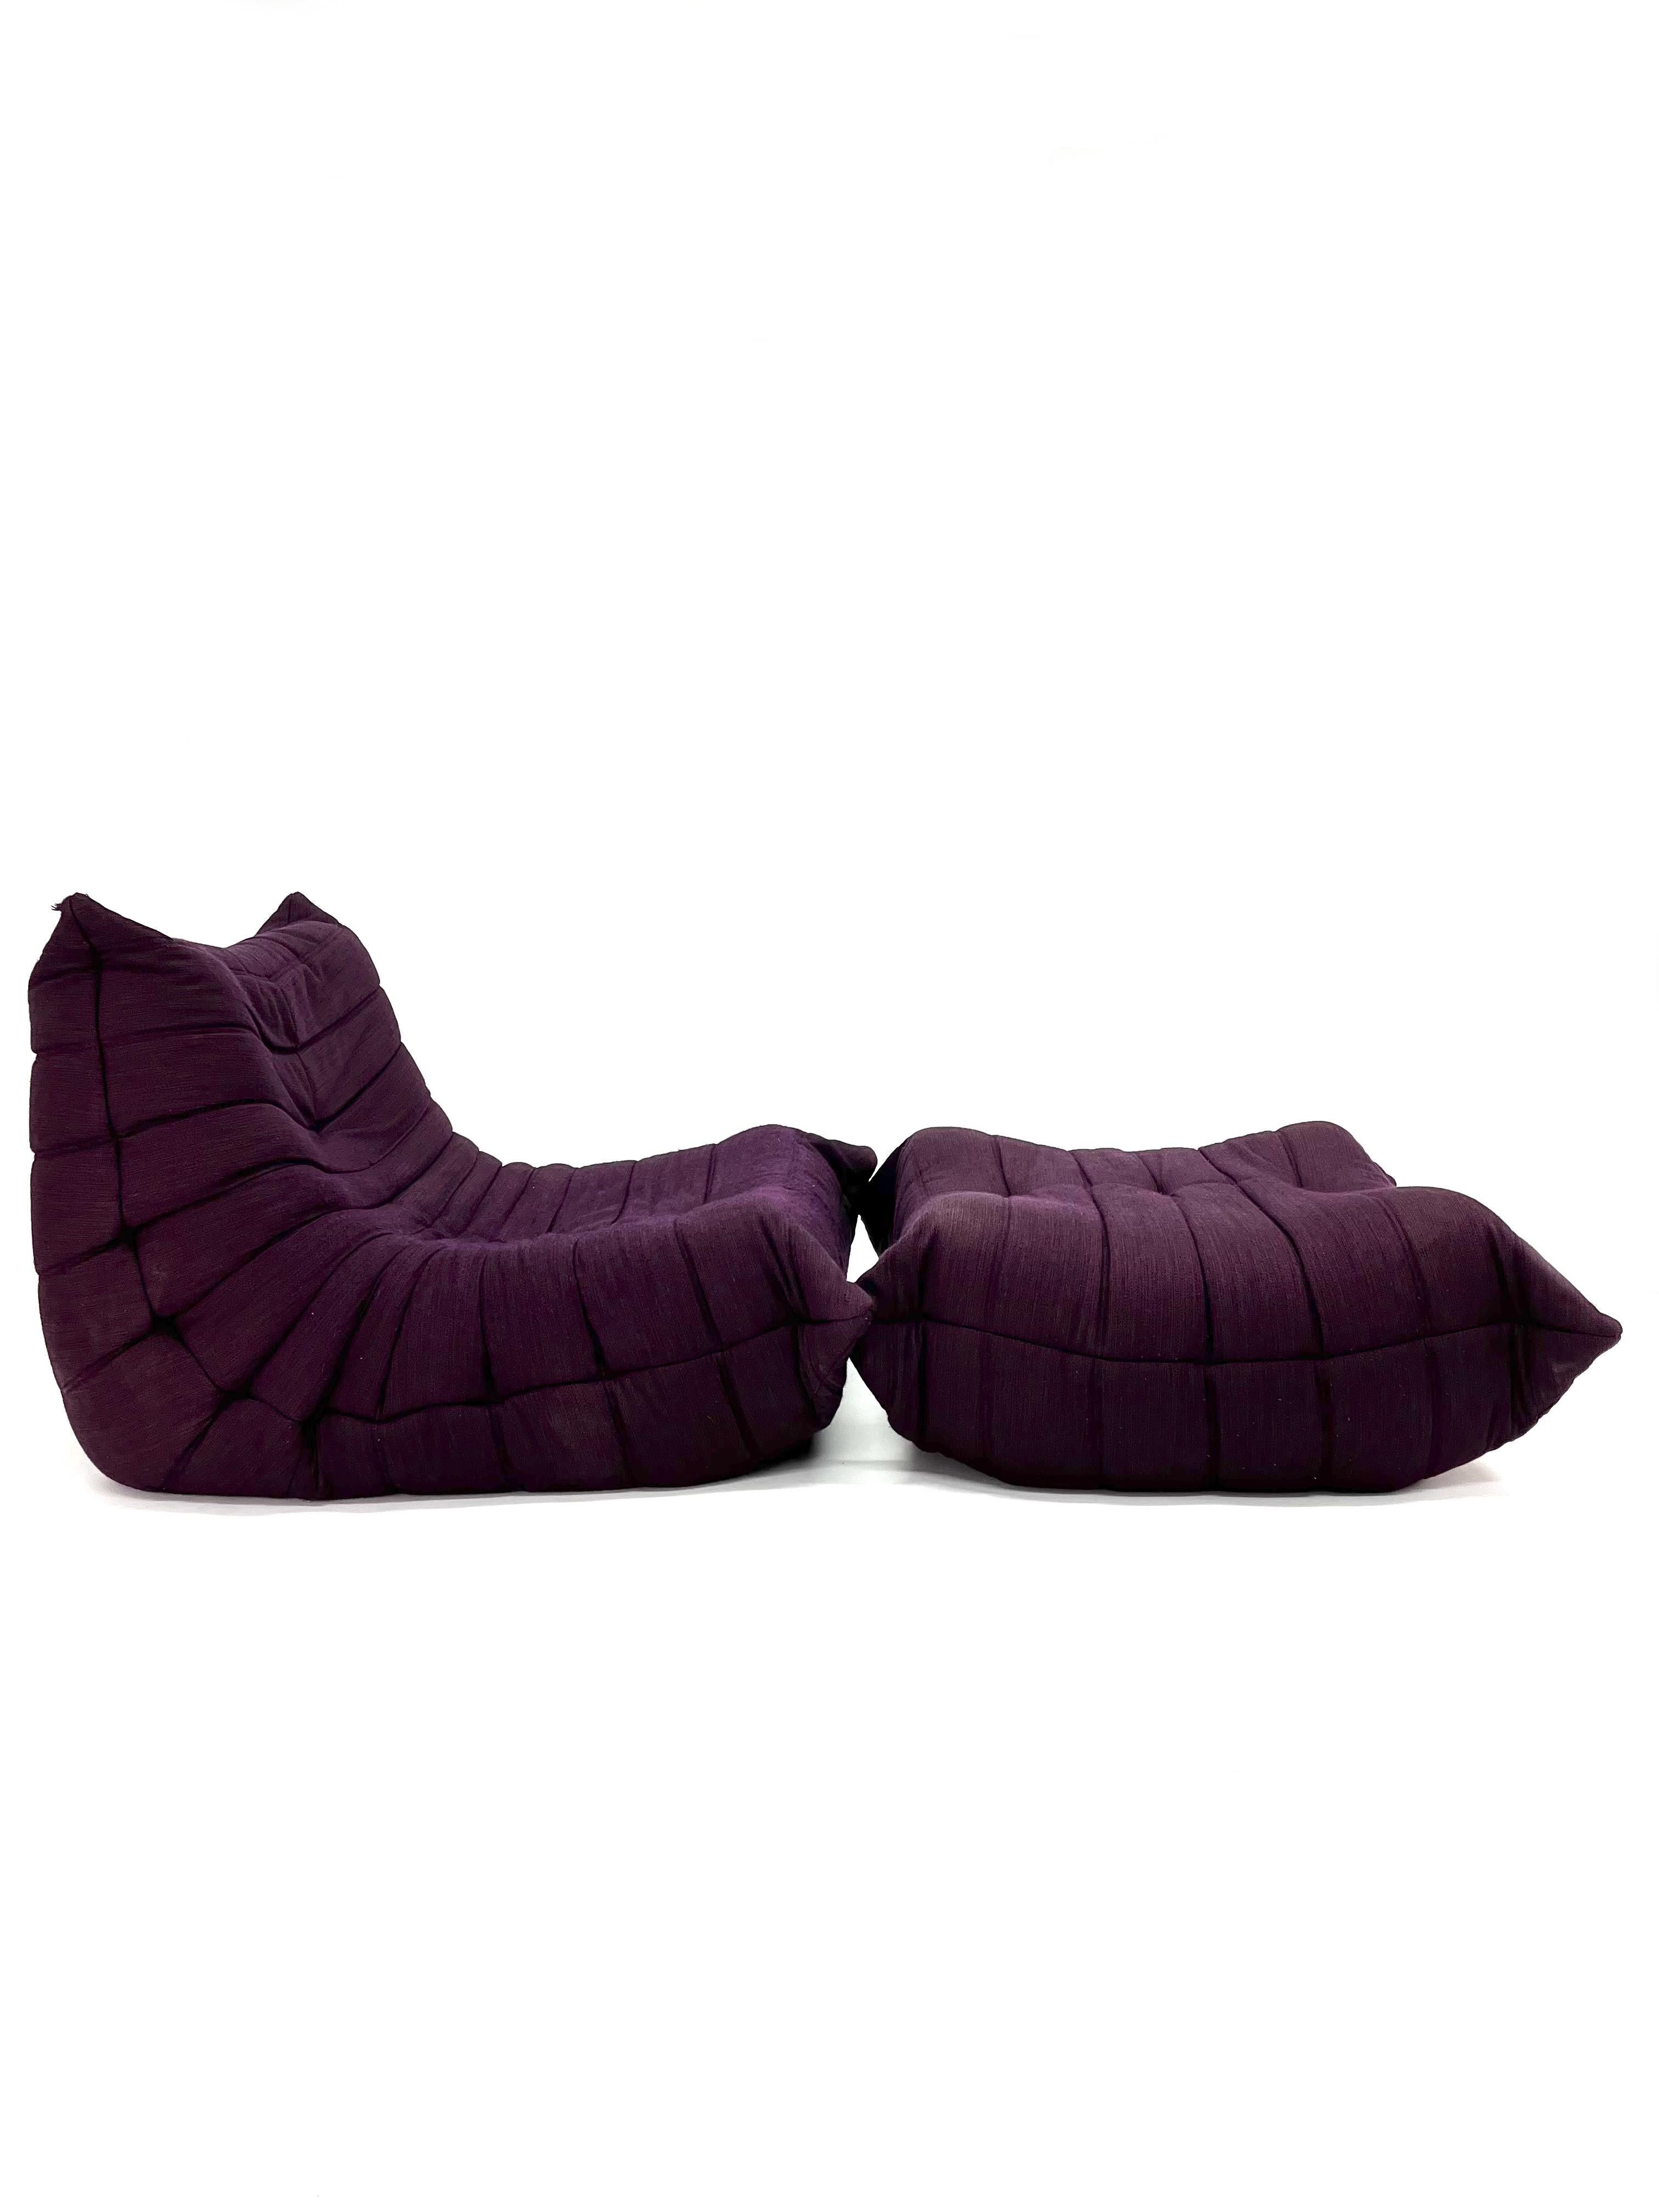 Upholstery Togo Chair and Ottoman in Purple by Michel Ducaroy for Ligne Roset For Sale